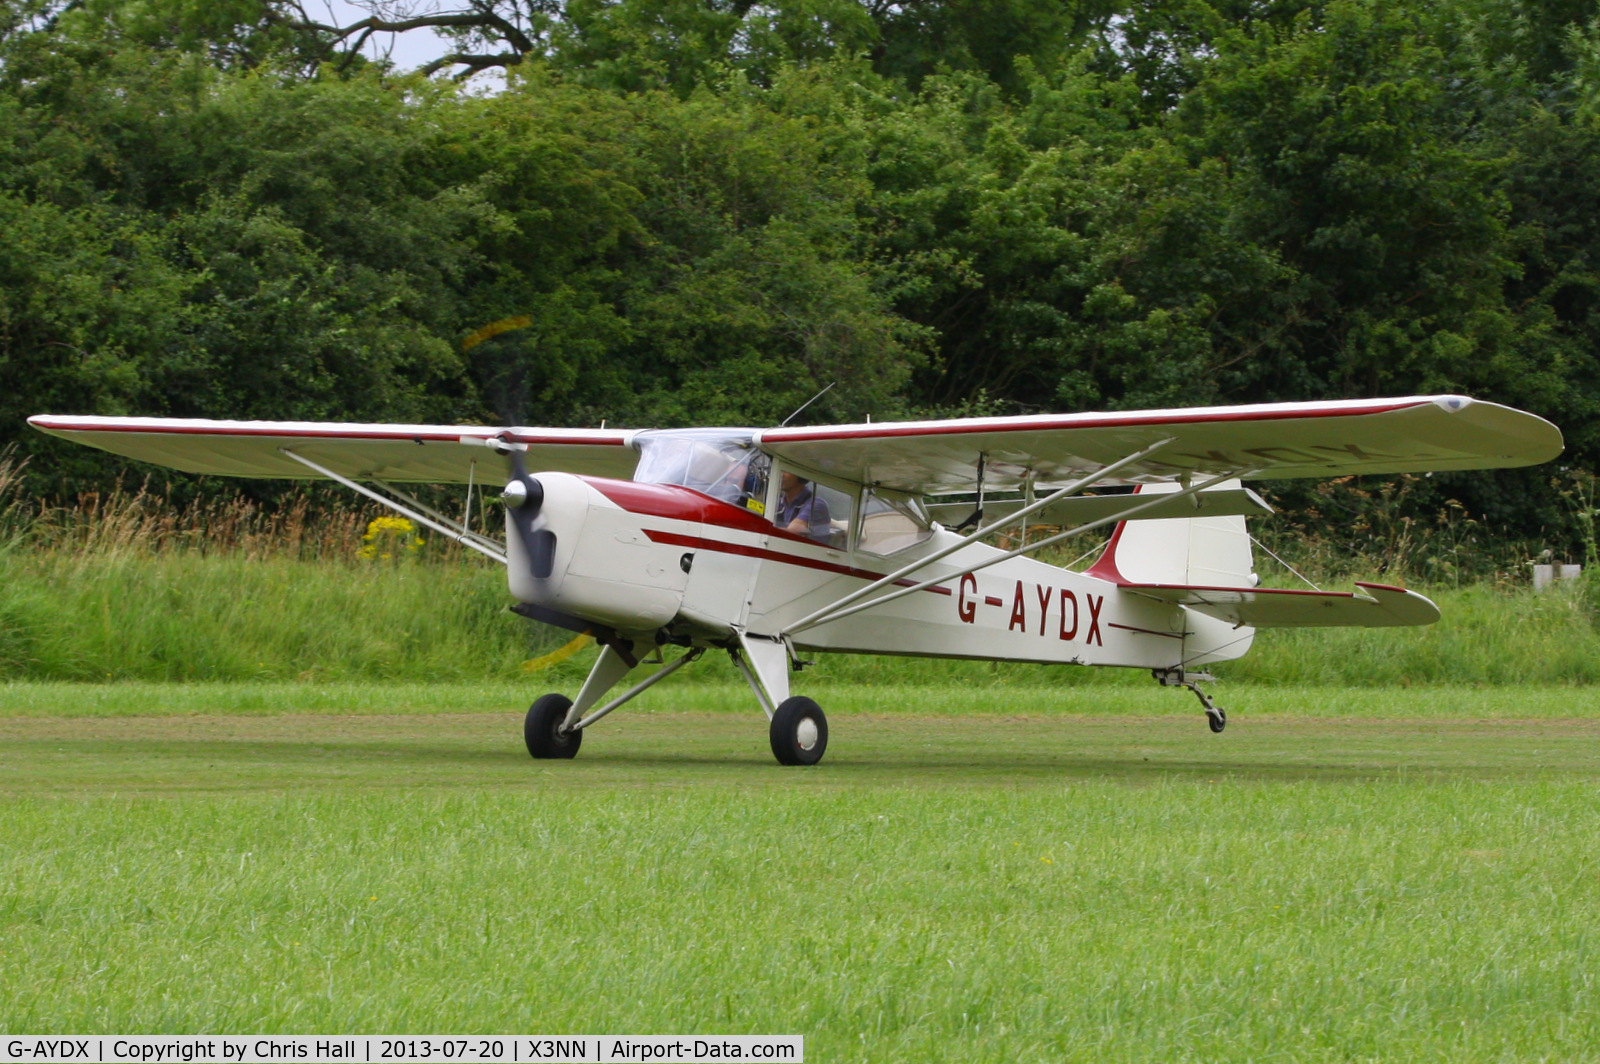 G-AYDX, 1968 Beagle A-61 Terrier 2 C/N B.647, at the Stoke Golding stakeout 2013